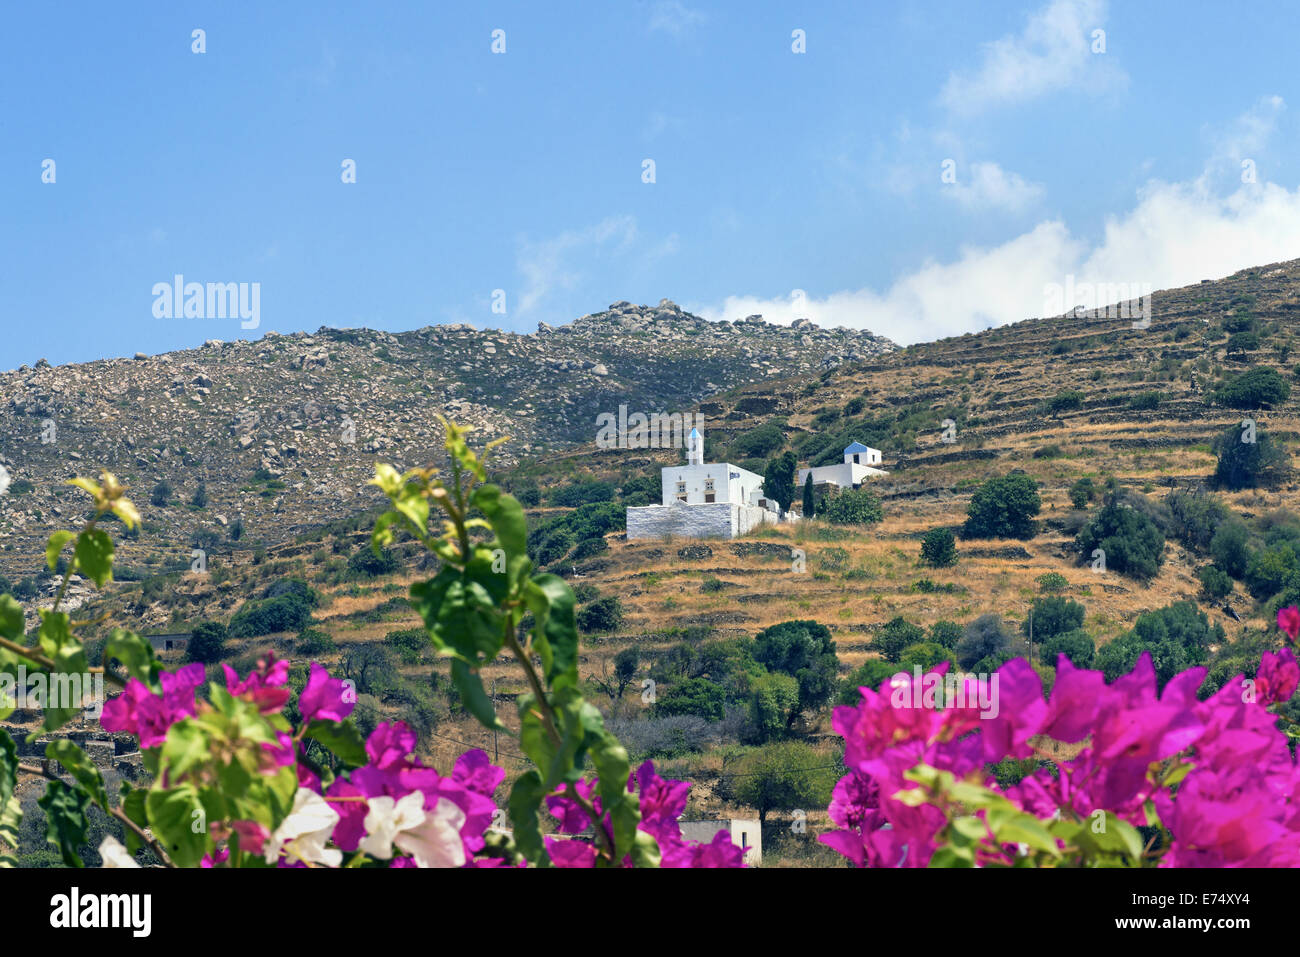 Colorful view from Agapi (Love in Greek) traditional village in Tinos island, Cyclades, Greece Stock Photo